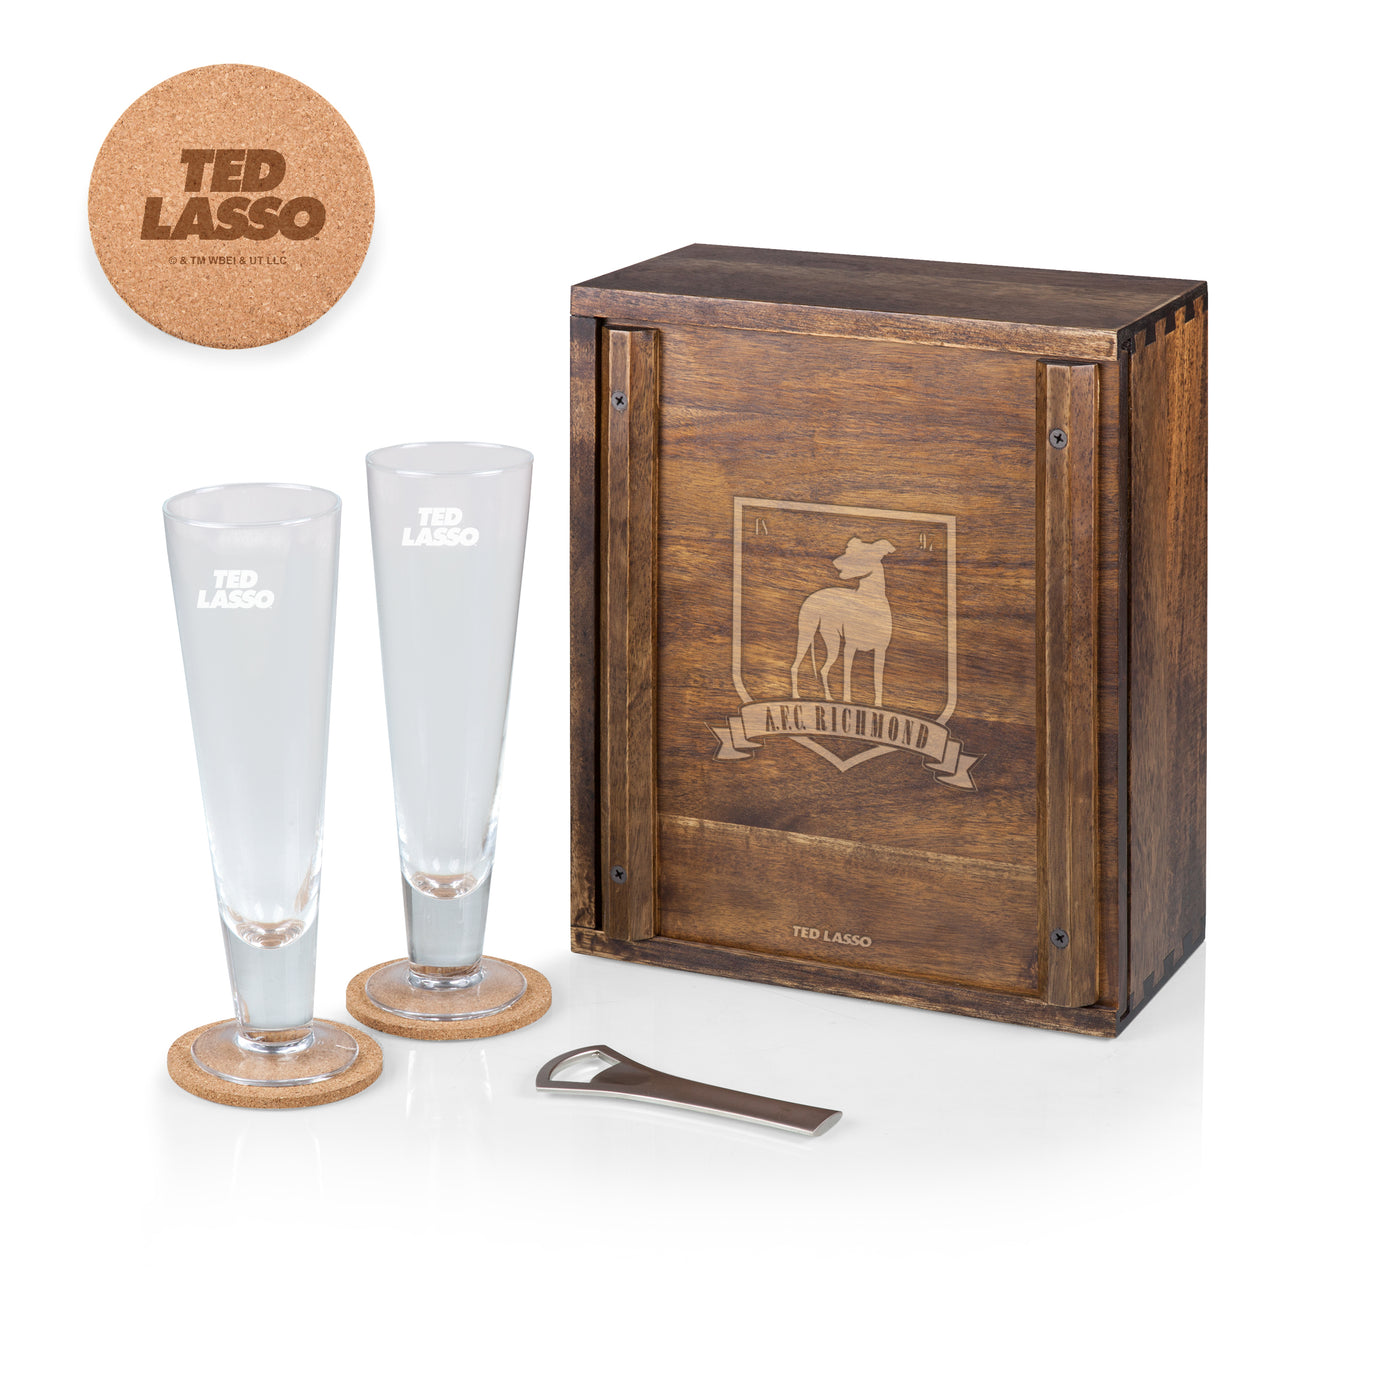 Exclusive Ted Lasso- Beverage Glass Set